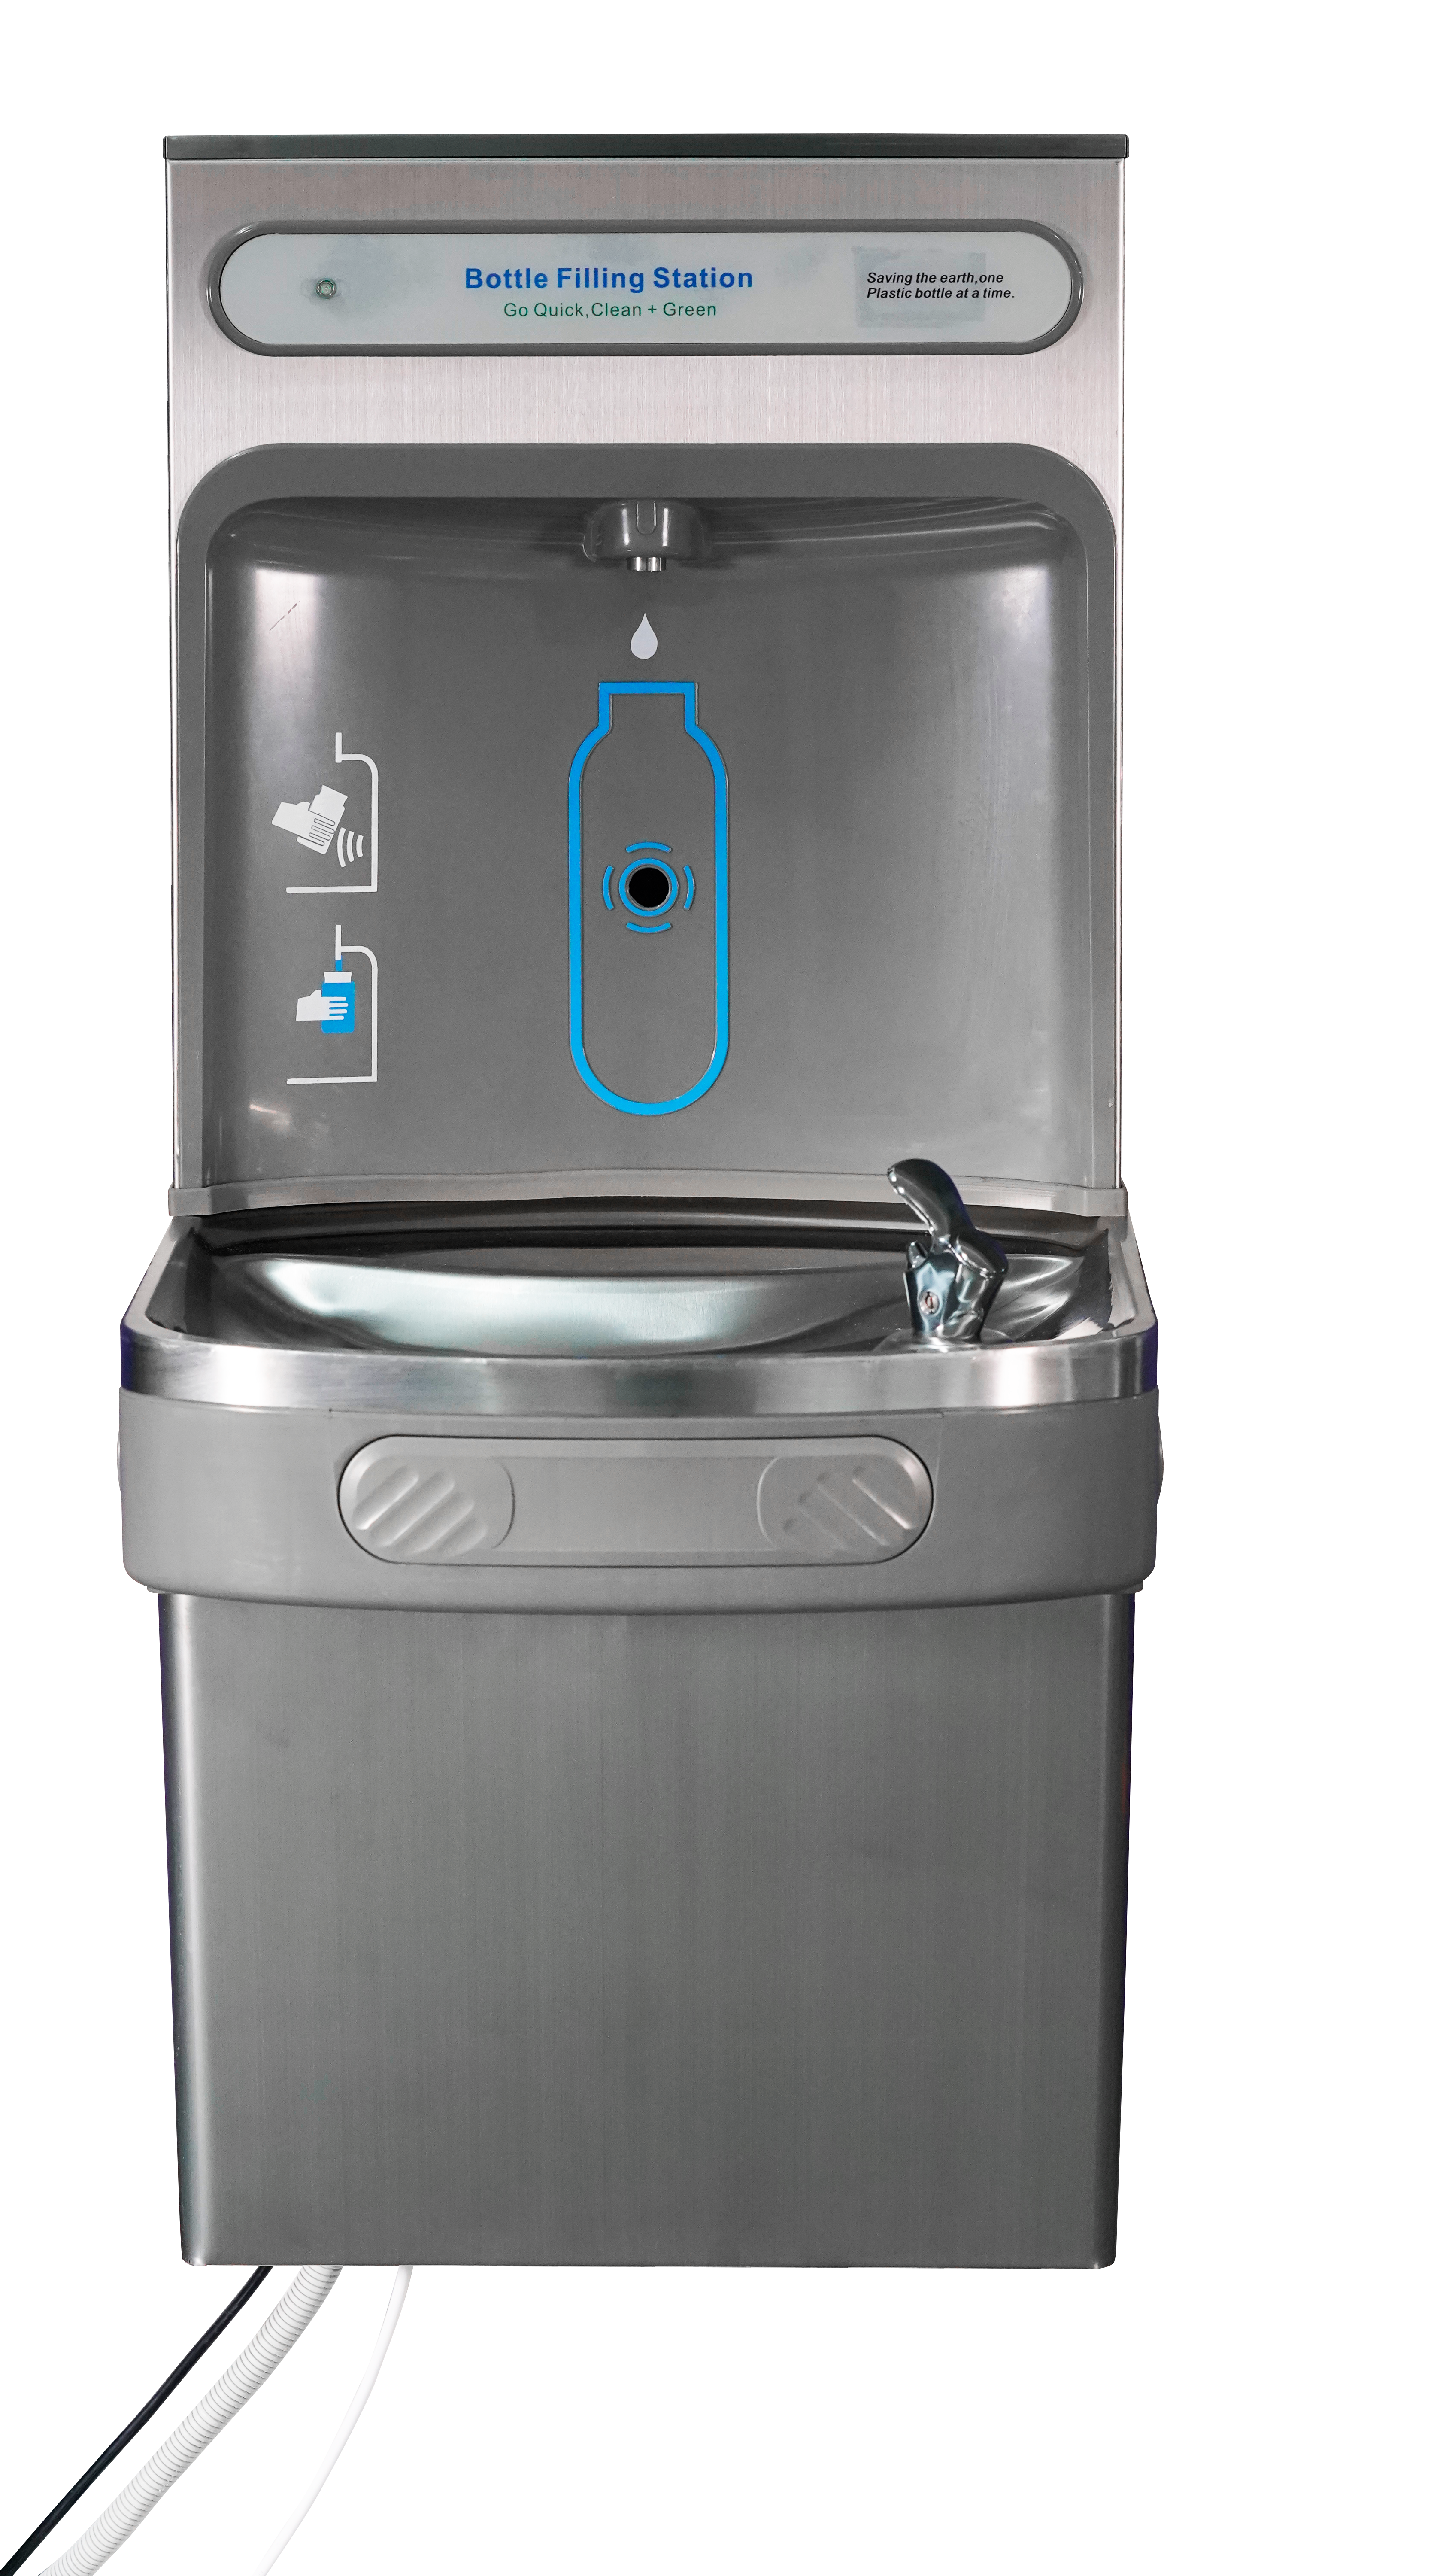 Public Touchless Stainless Steel Wall Drinking Fountain Water Cooler